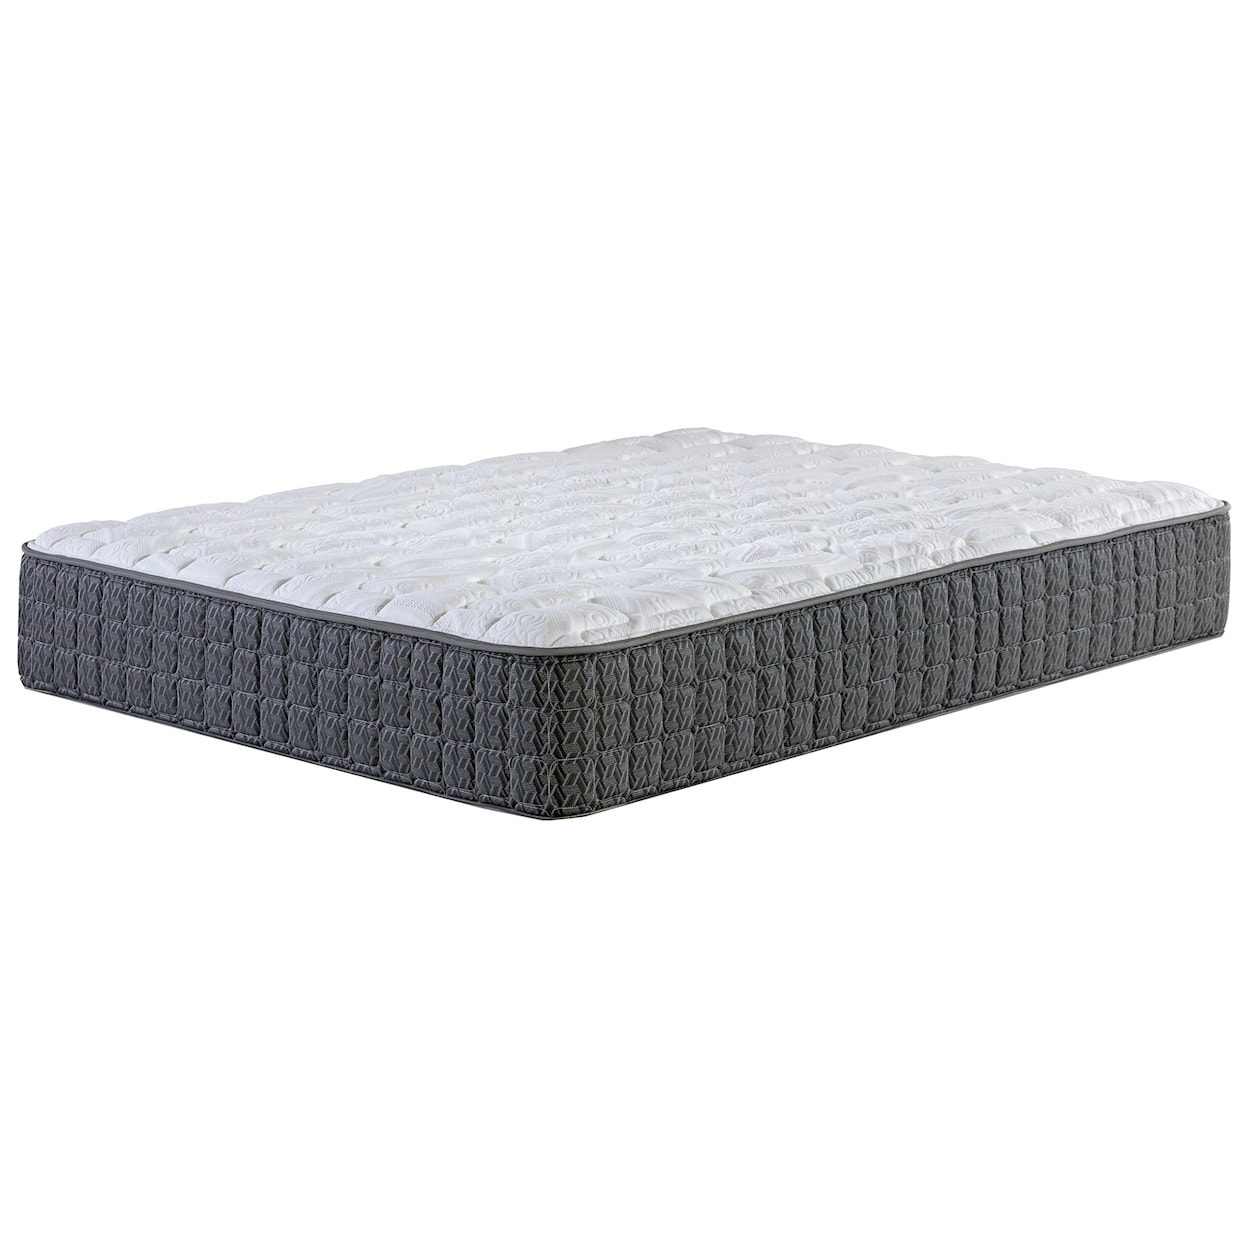 Corsicana Hallandale Firm Twin XL Firm Two Sided Mattress